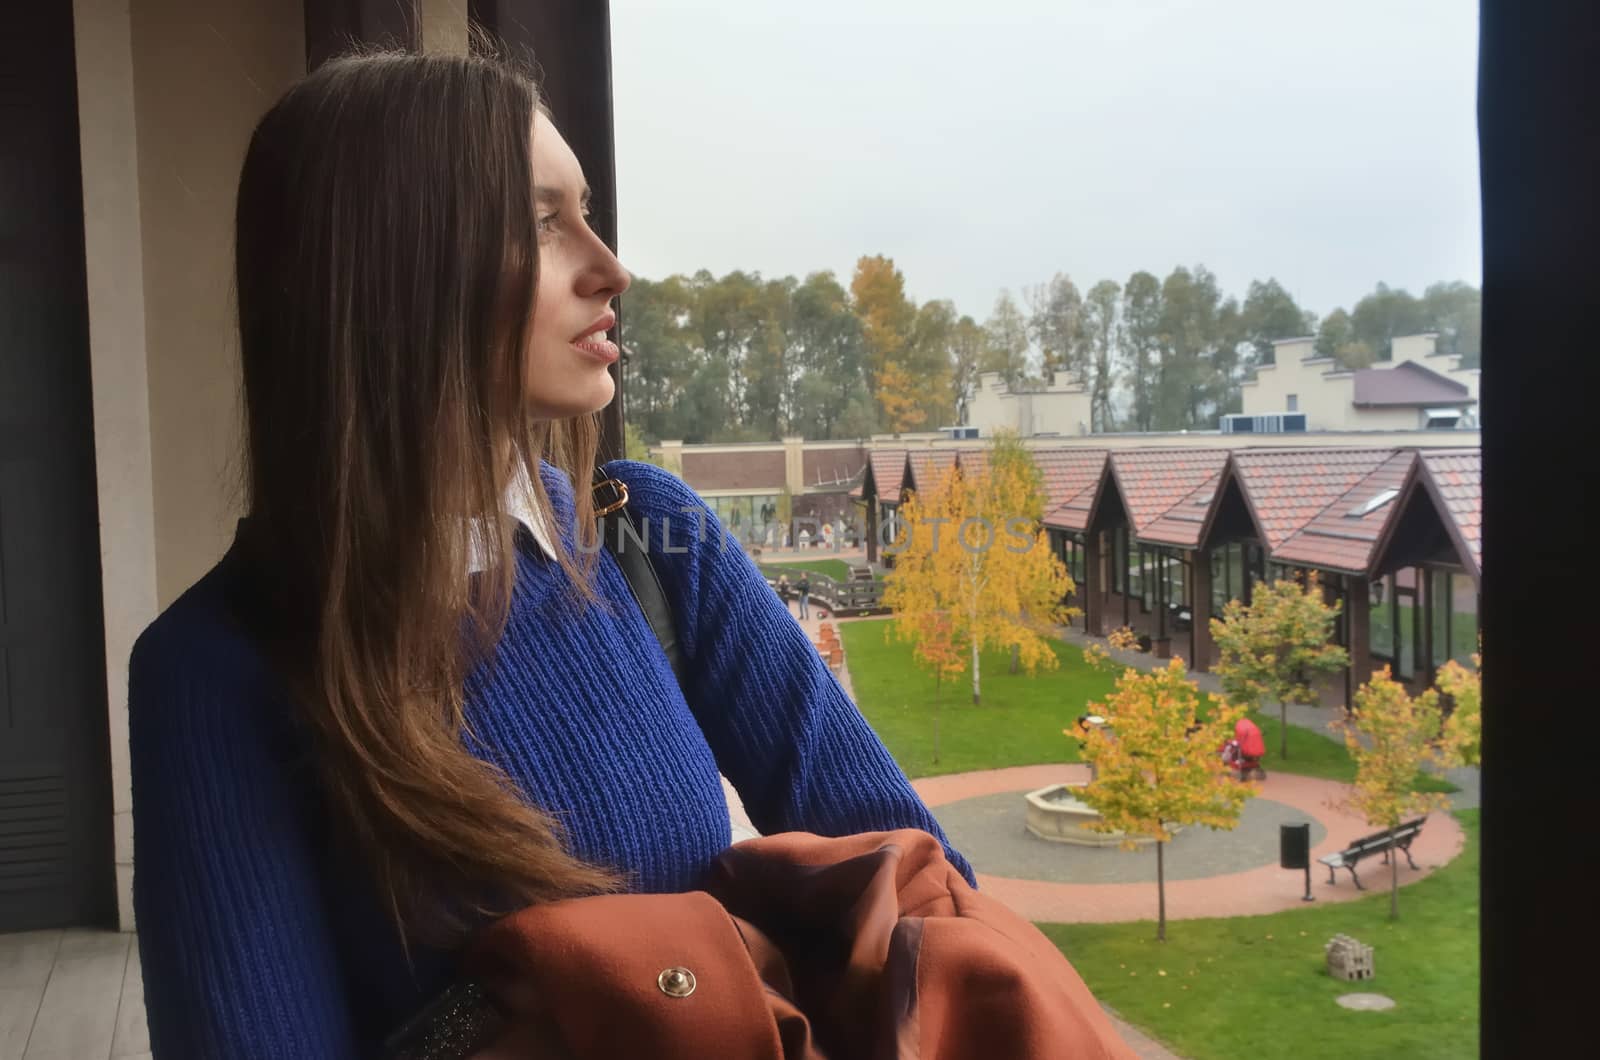 European girl looks at the window on the trees and the building